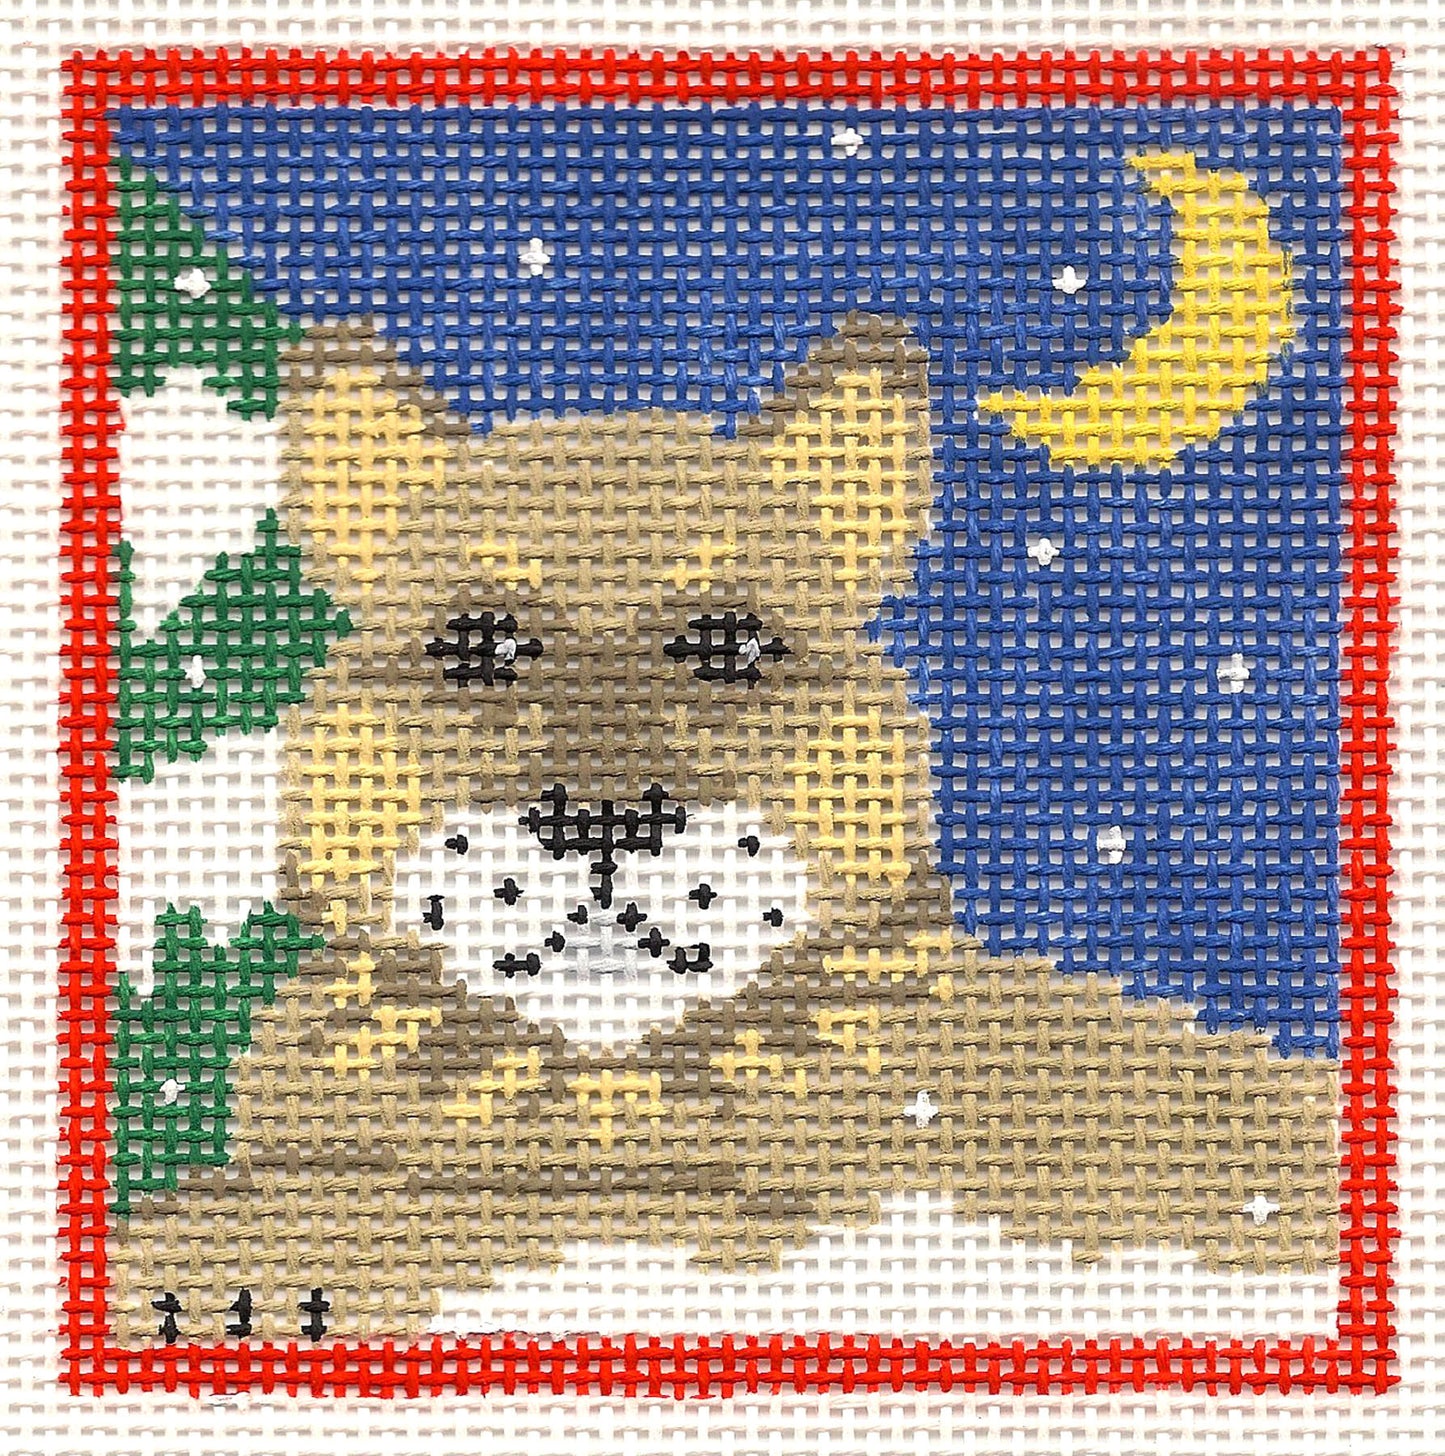 Canvas ~ Cougar Mountain Lion in the Night Sky handpainted Needlepoint Canvas by Kathy Schenkel